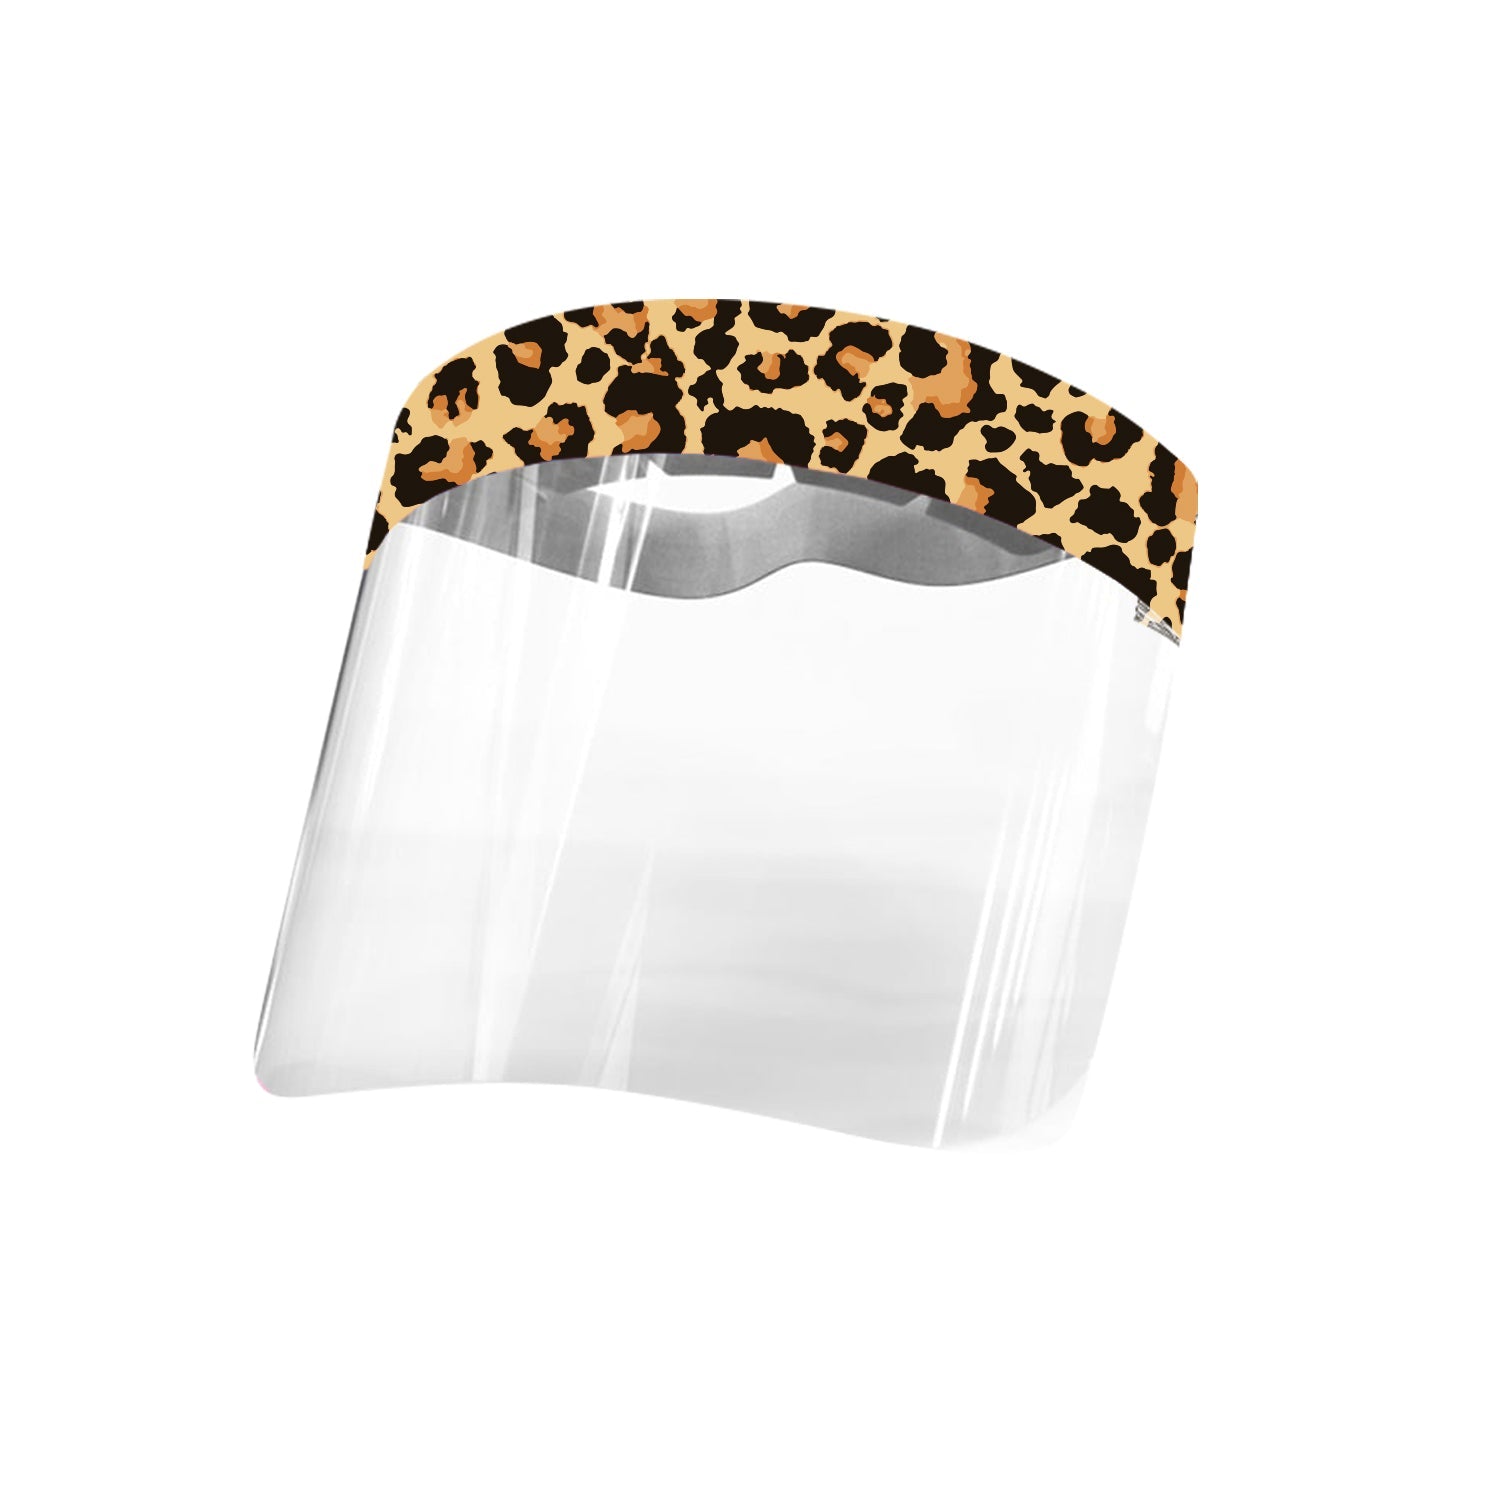 High quality face shields designed to stop any droplets from coughs or sneezes! Keep you and your family protected! Comfortable, Durable, Quality Material. Comes with removable protective liner. Easy To Clean.  Comes with adjustable strap. Crystal clear transparency.  Lightweight for tweens, teens and young adults. Leopard design.